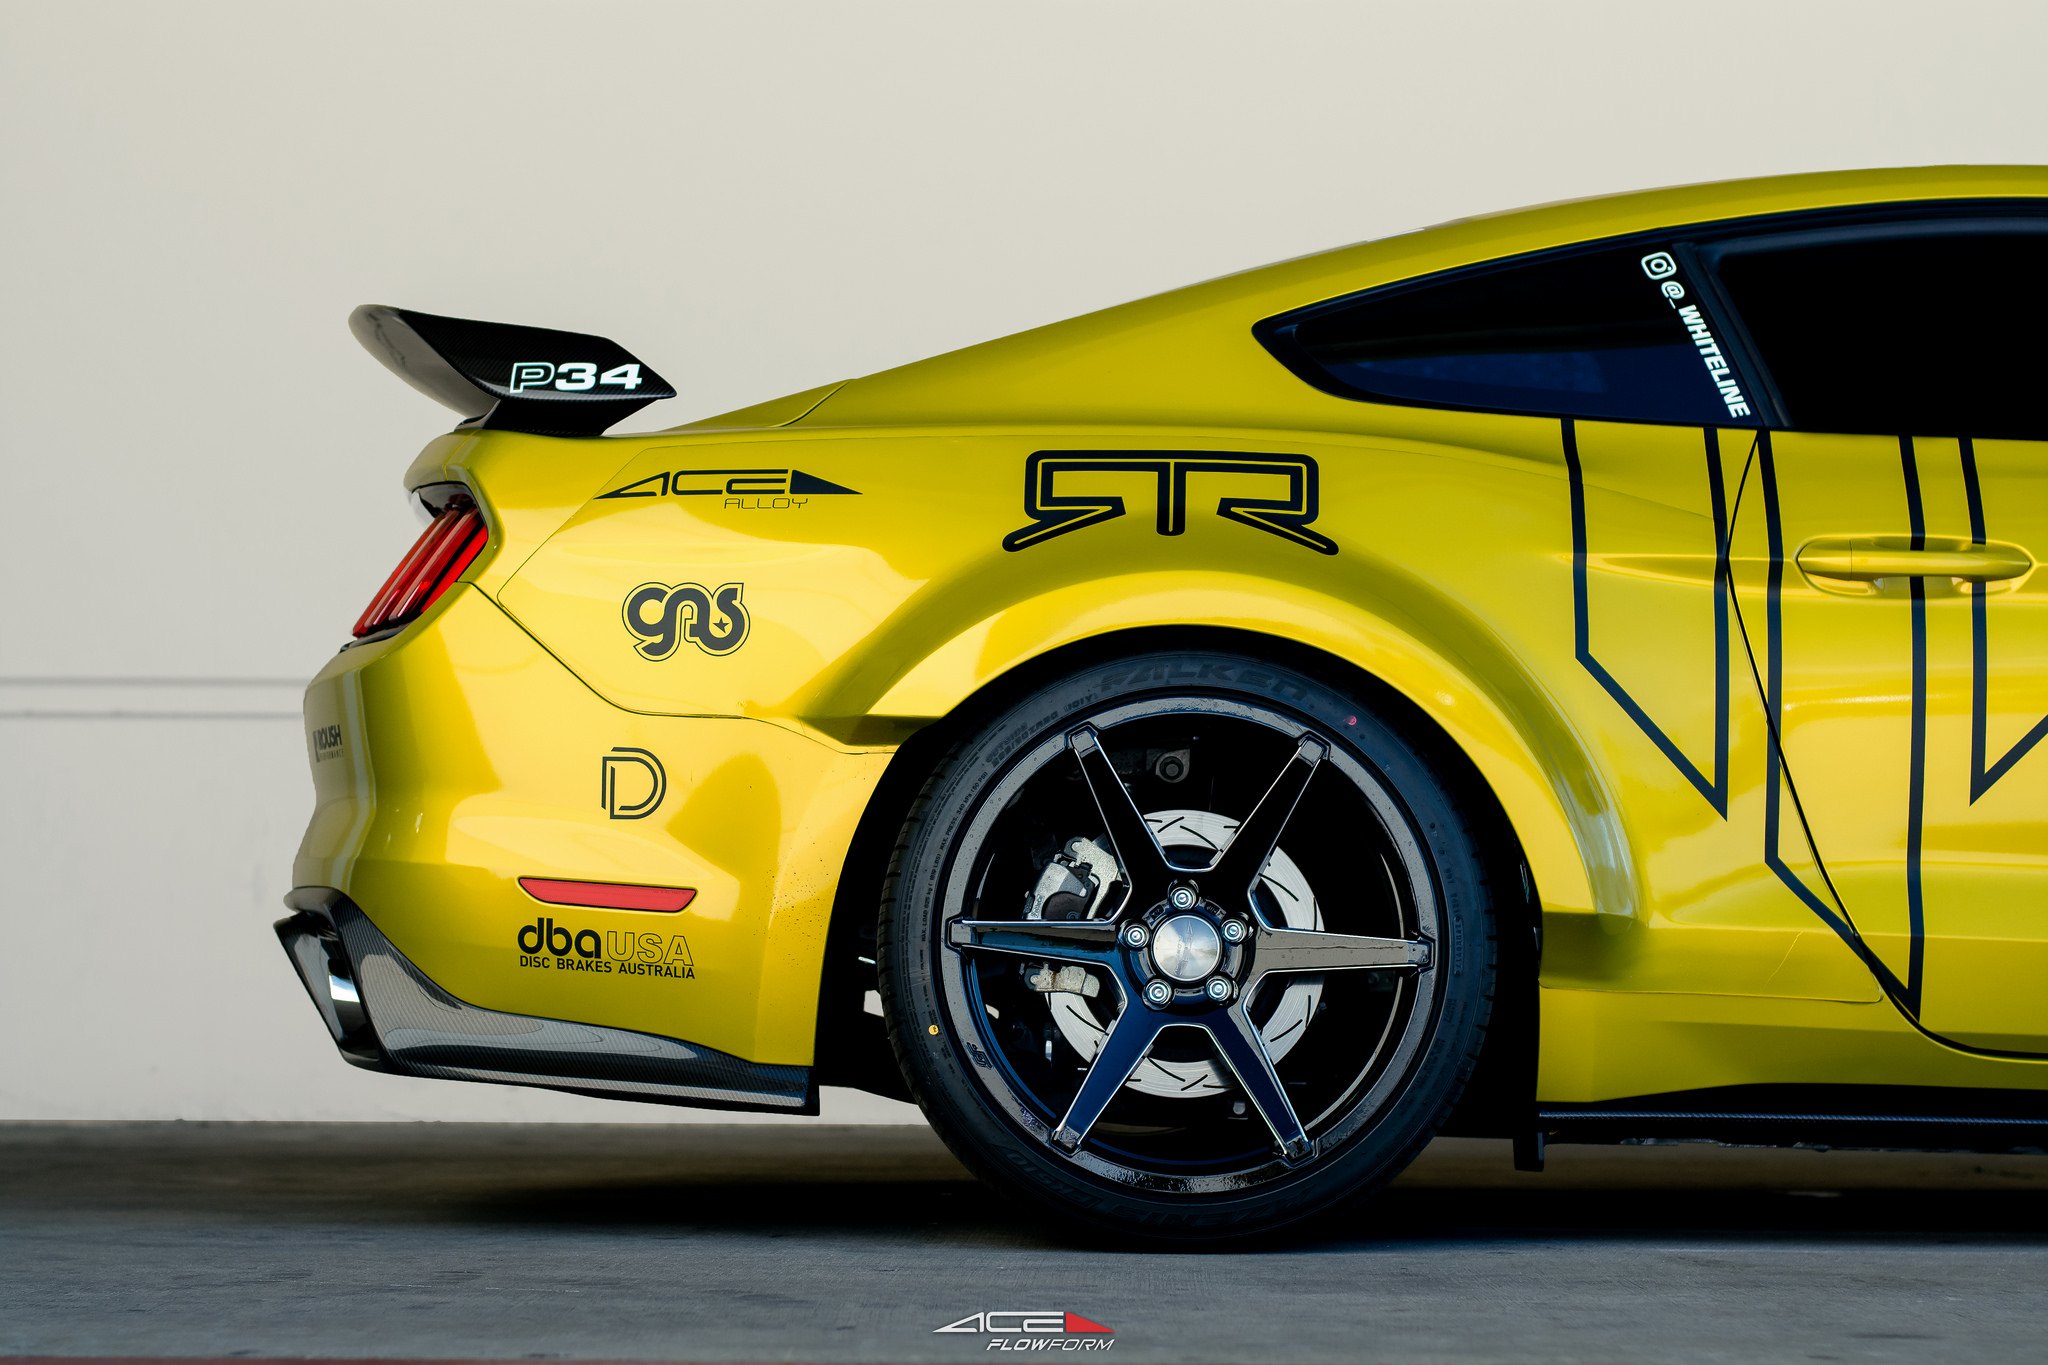 Carbon Fiber Rear Spoiler on Yellow Ford Mustang - Photo by Ace Alloy